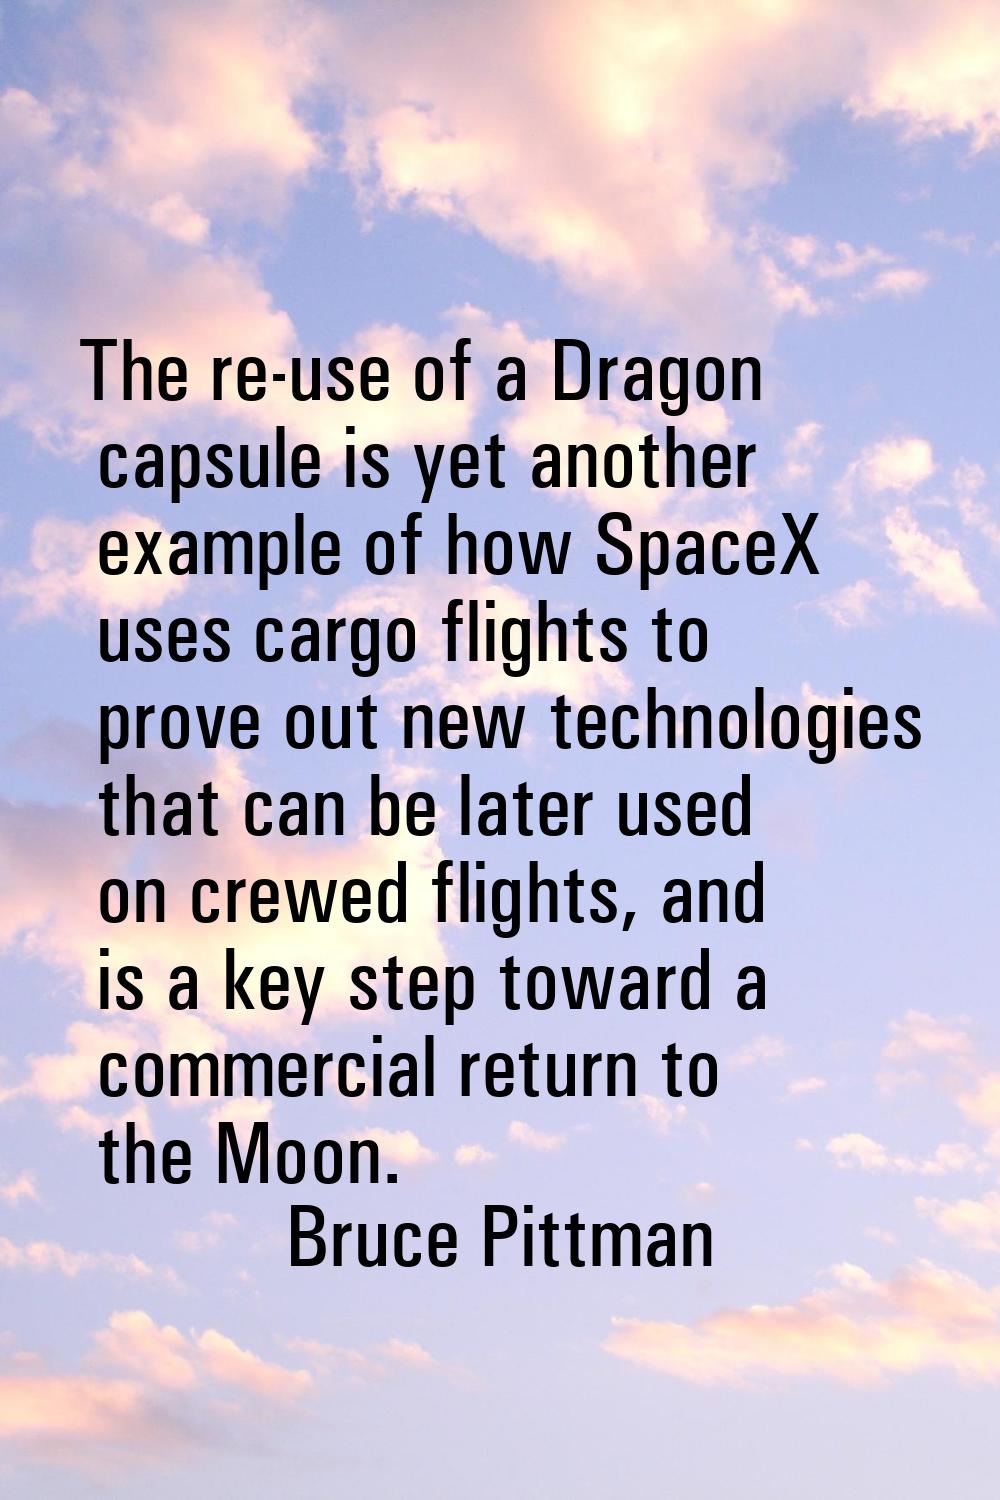 The re-use of a Dragon capsule is yet another example of how SpaceX uses cargo flights to prove out